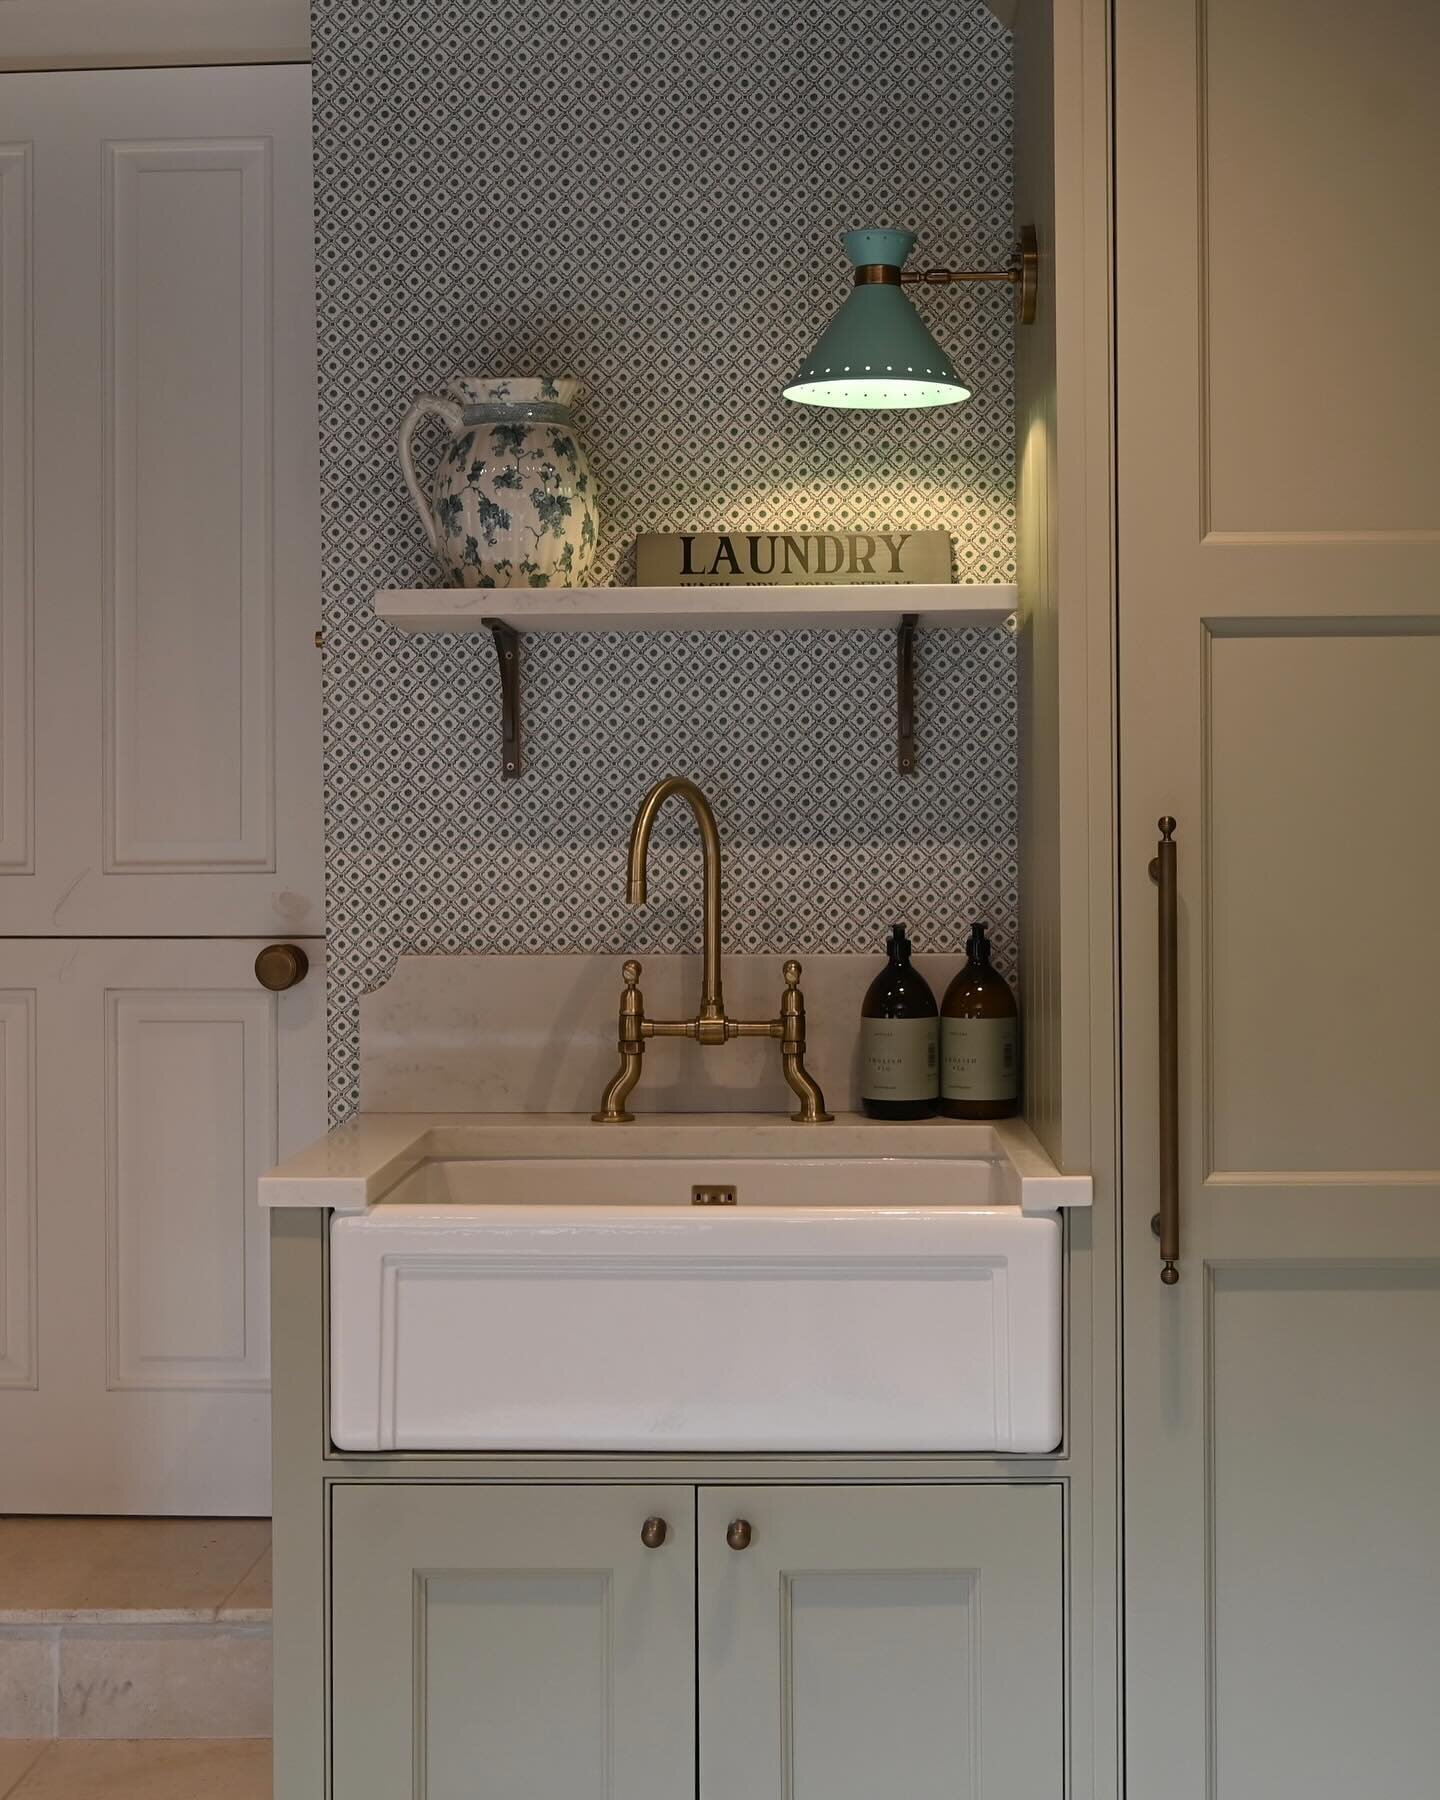 Weekend plans: laundry 😍

When your laundry room looks this good, we&rsquo;d gladly spend all weekend in it. 

#cottontreeinteriors 

&hellip;

#laundryroom #laundryroommakeover #laundrygoals #pantryinspo #interiordesign #countryhome #farmhousedesig